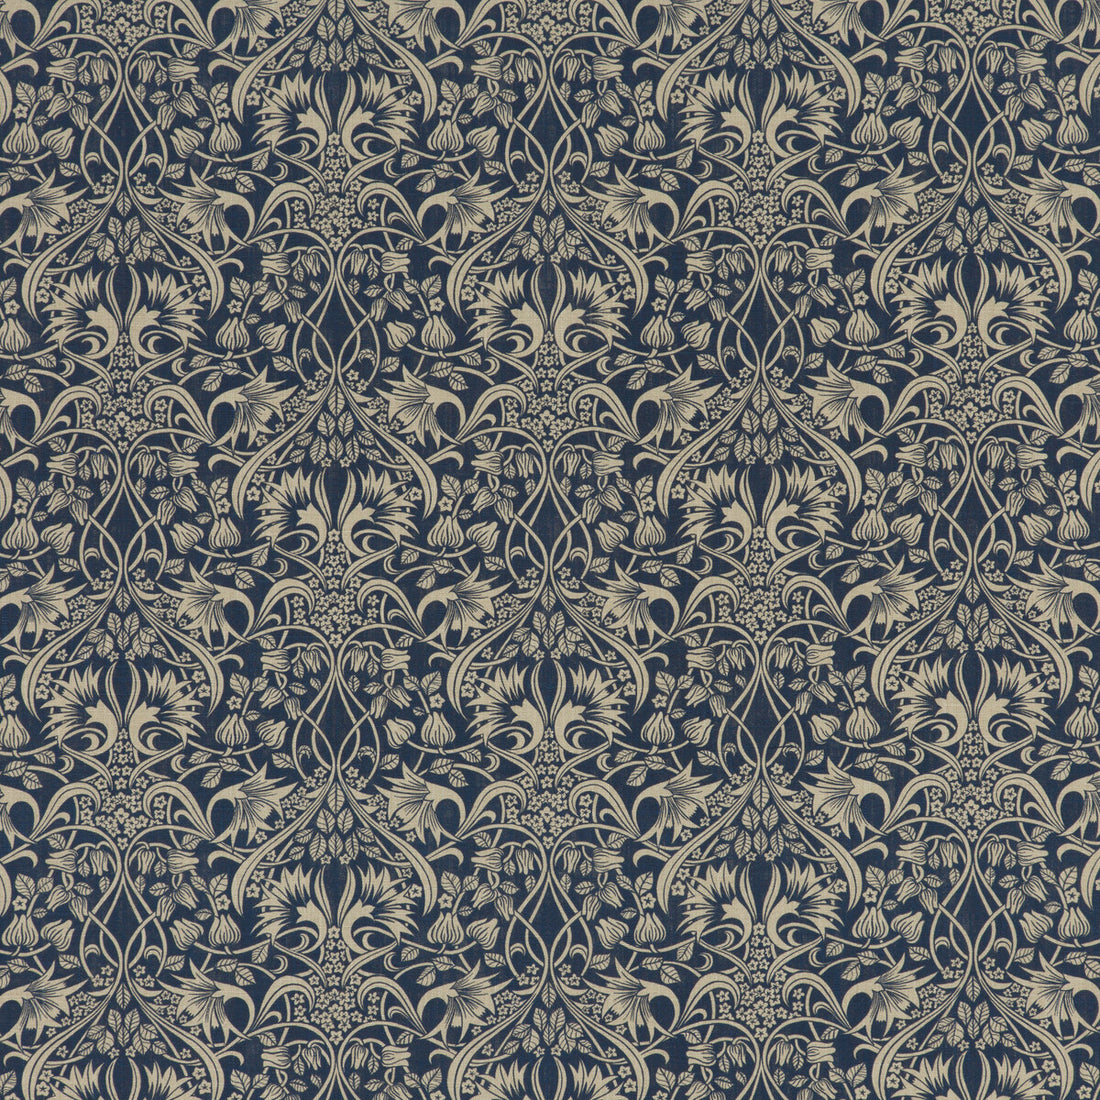 Fritillerie fabric in indigo color - pattern BP10620.1.0 - by G P &amp; J Baker in the Originals V collection